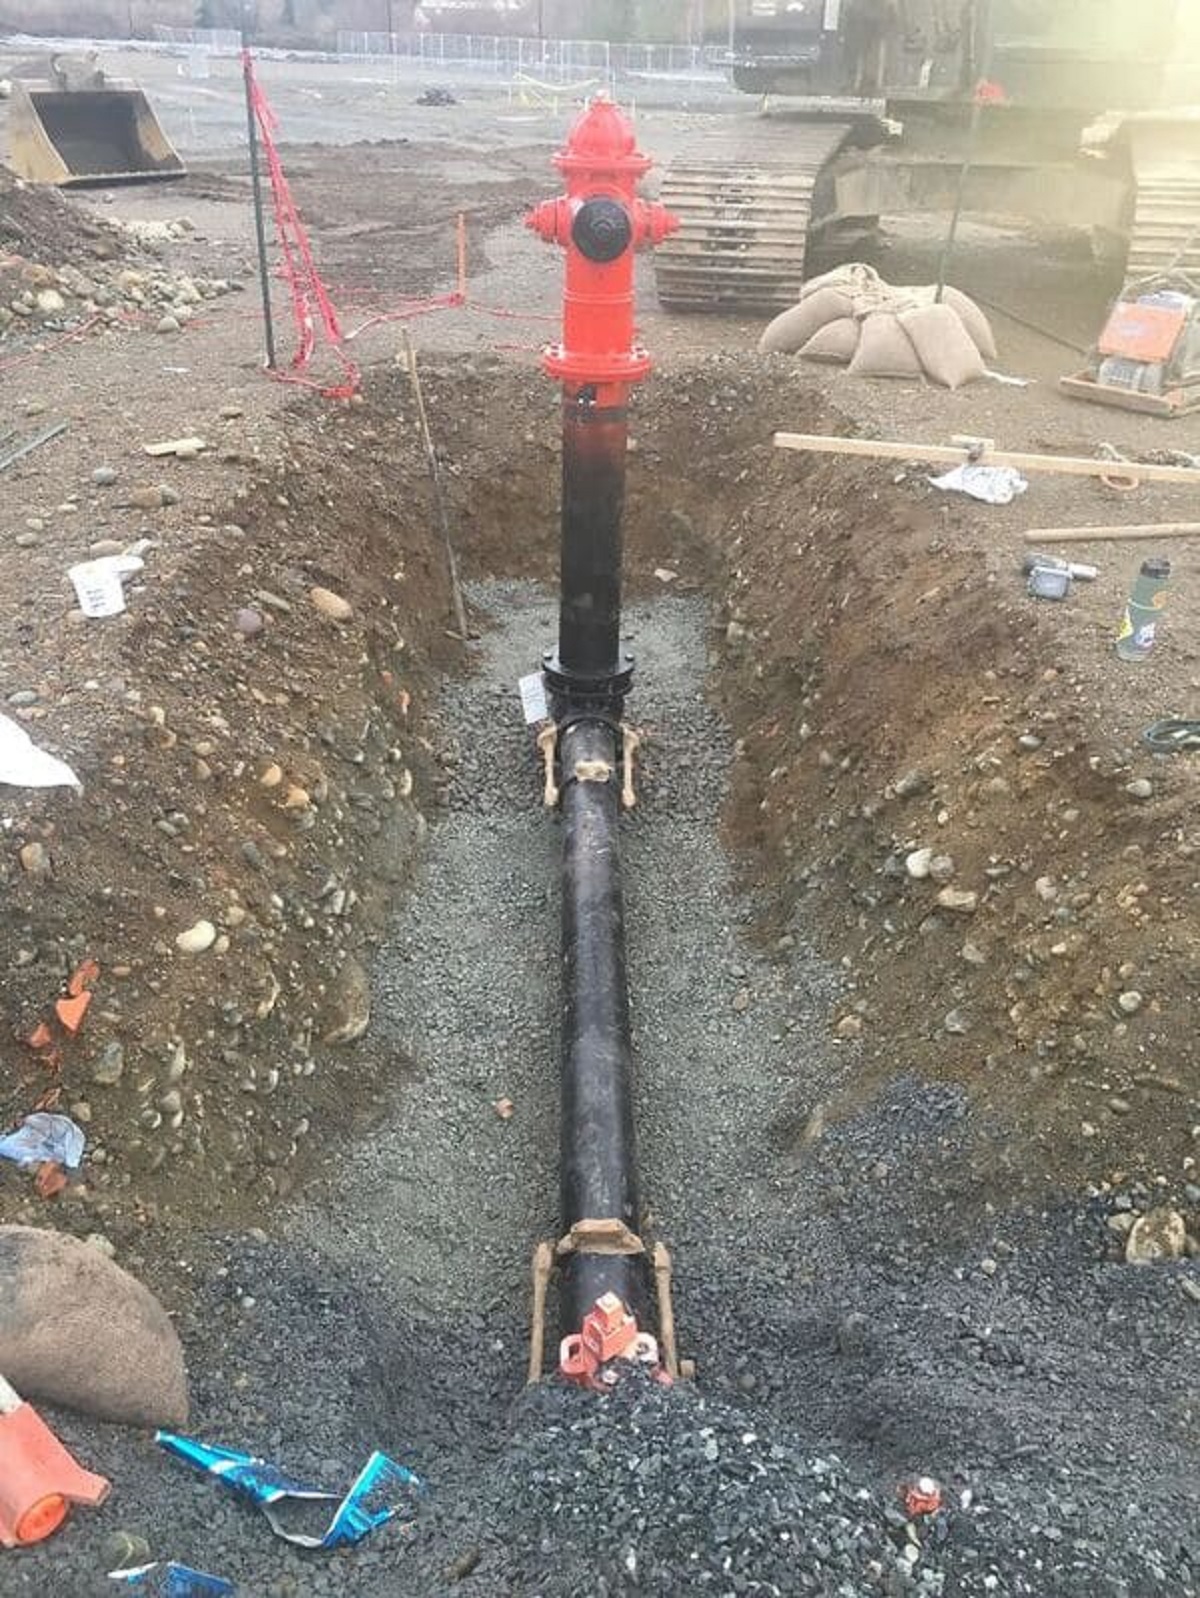 “I Thought You Might Like To See What A Hydrant Looks Like Installed And Unburied”